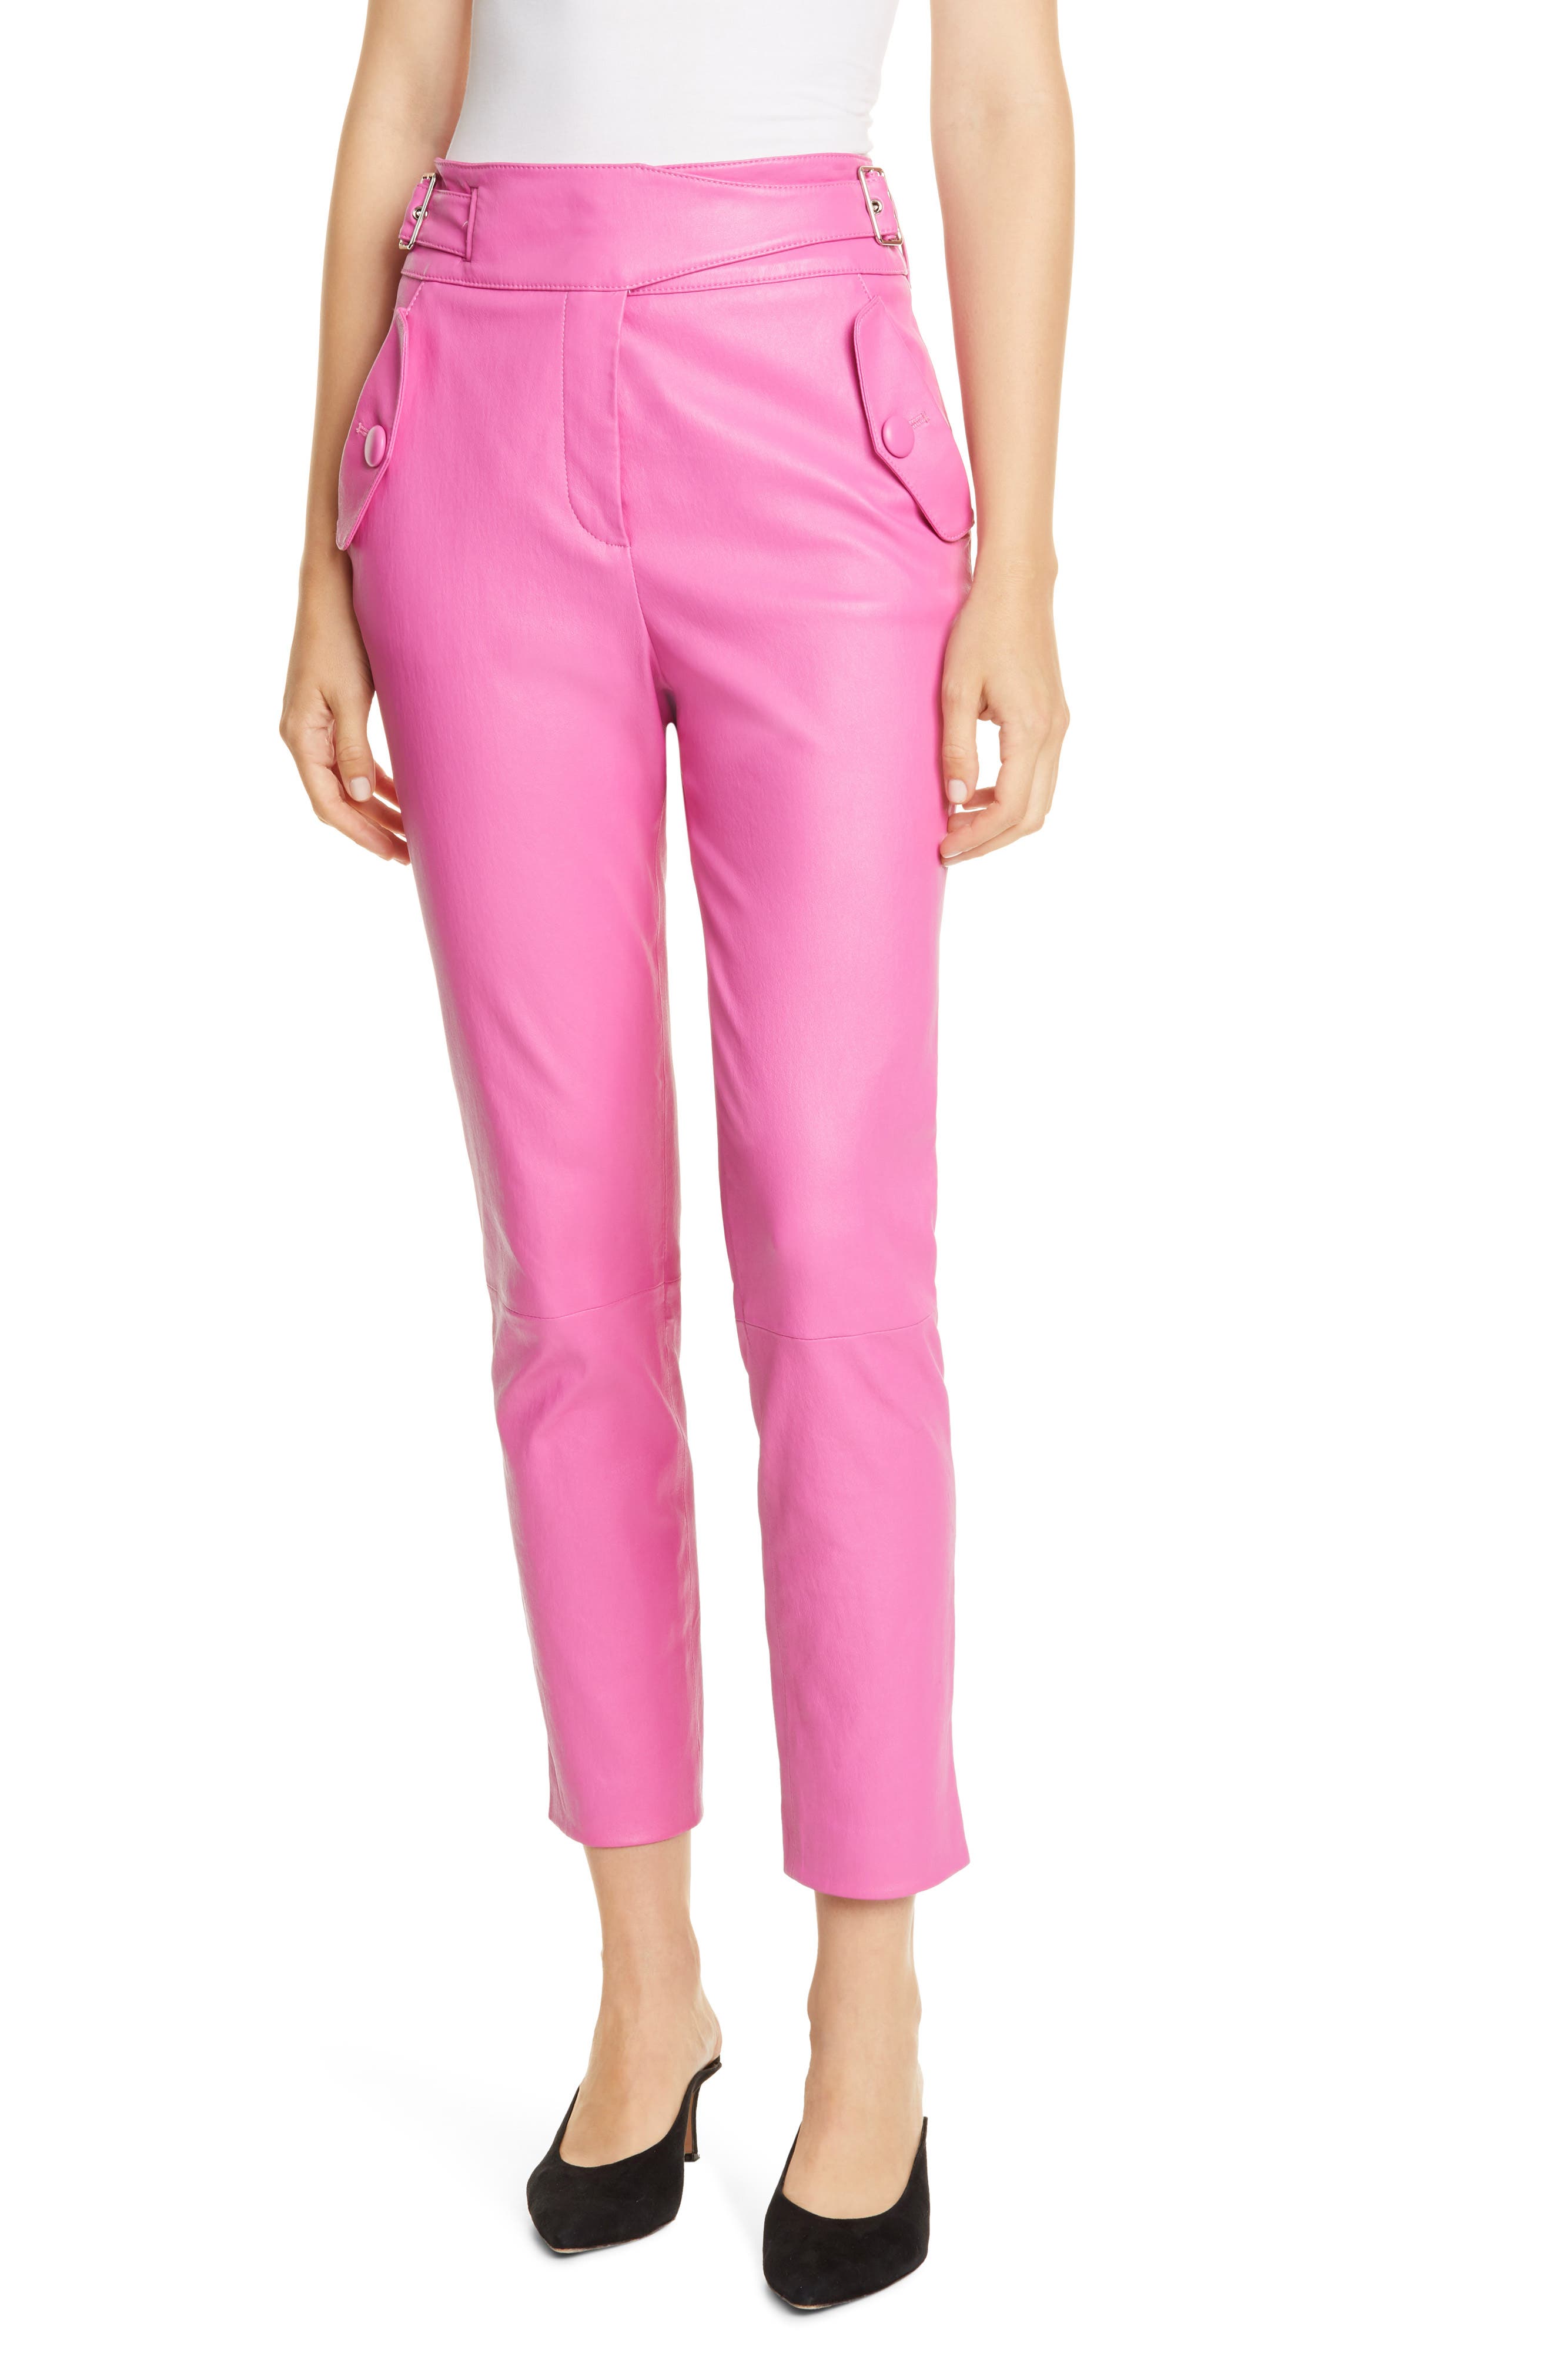 leather pants pink